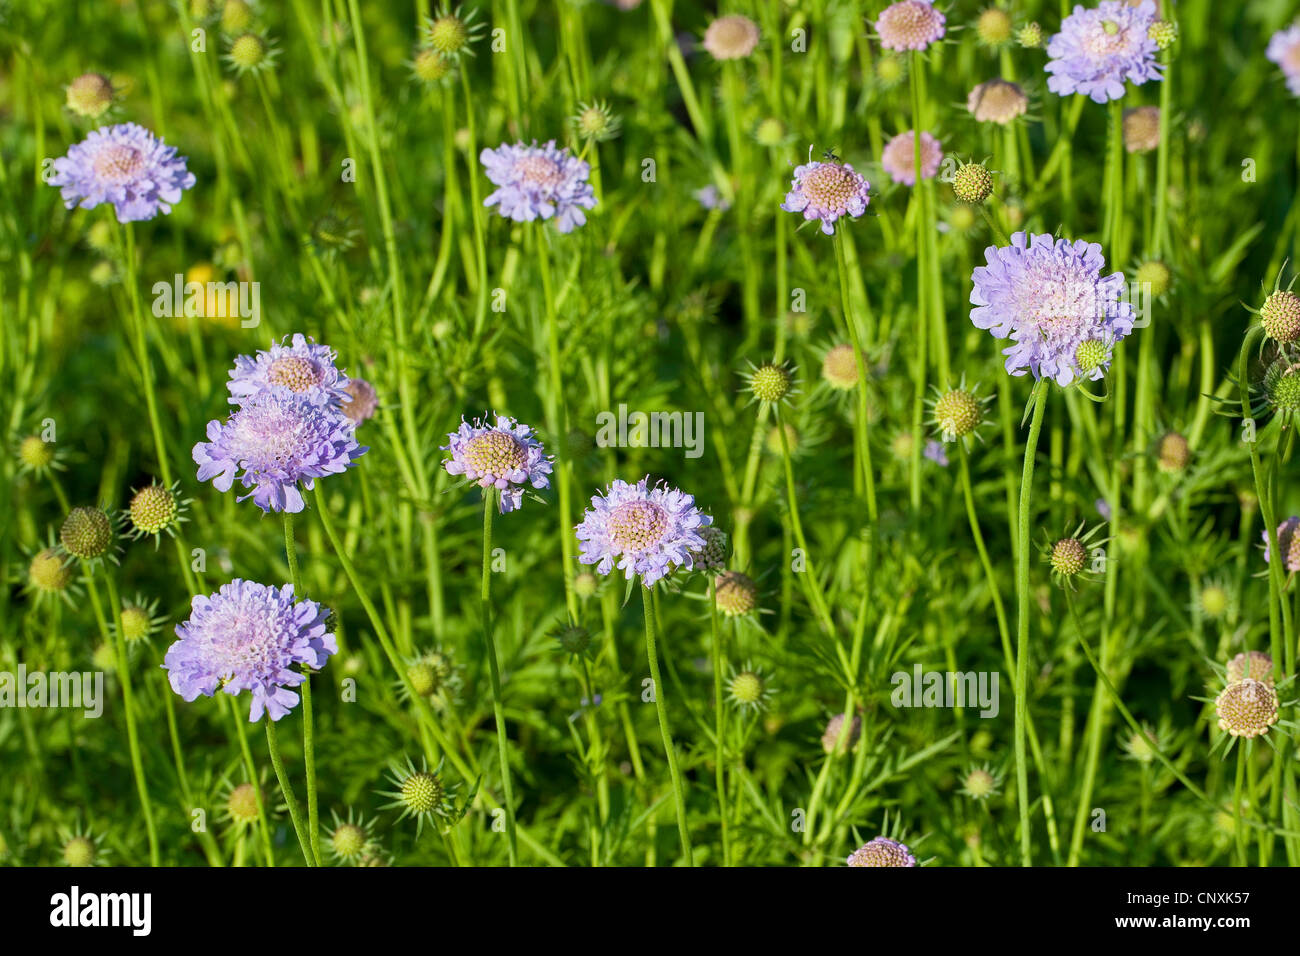 Shining Scabious (Scabiosa lucida), blooming, Germany Stock Photo